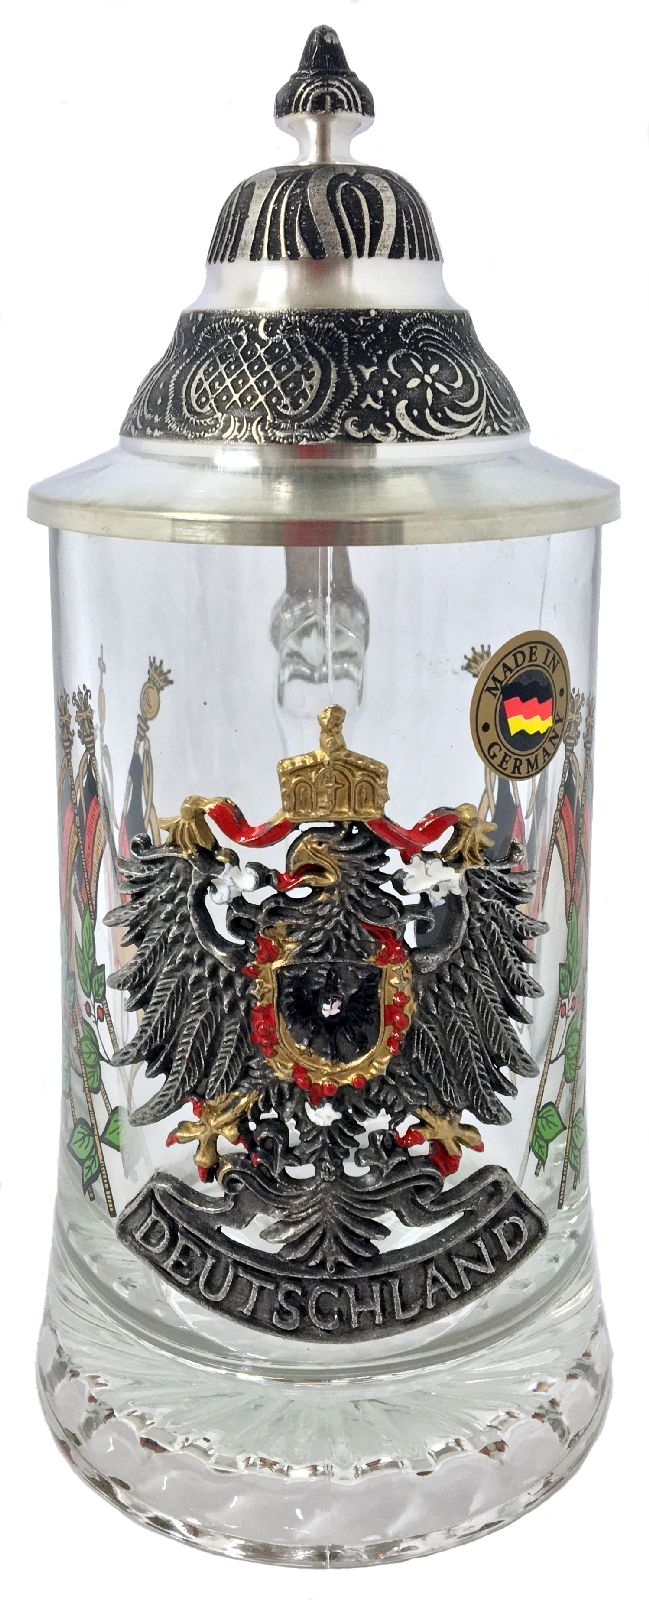 Deutschland Germany Eagle and Flags Pewter Lid Glass European Beer Stein .4 L